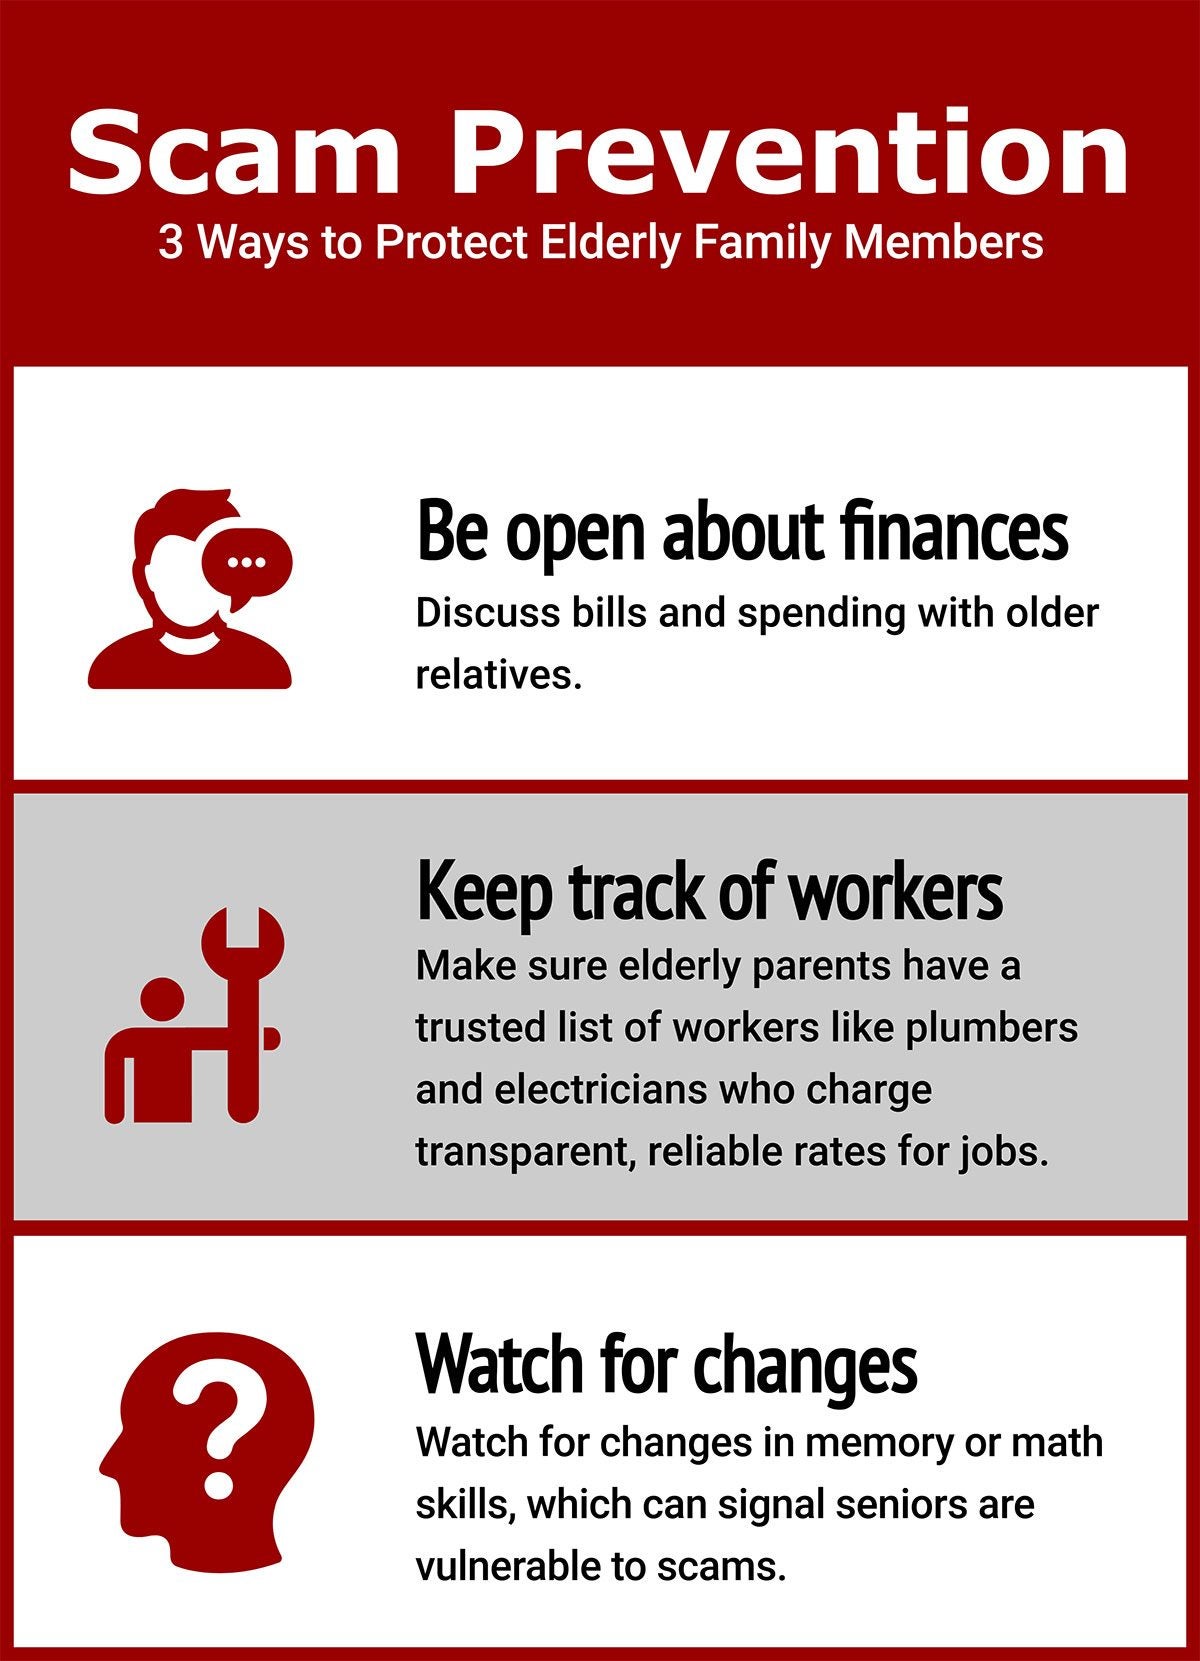 prevent senior scam tips graphic by USC 